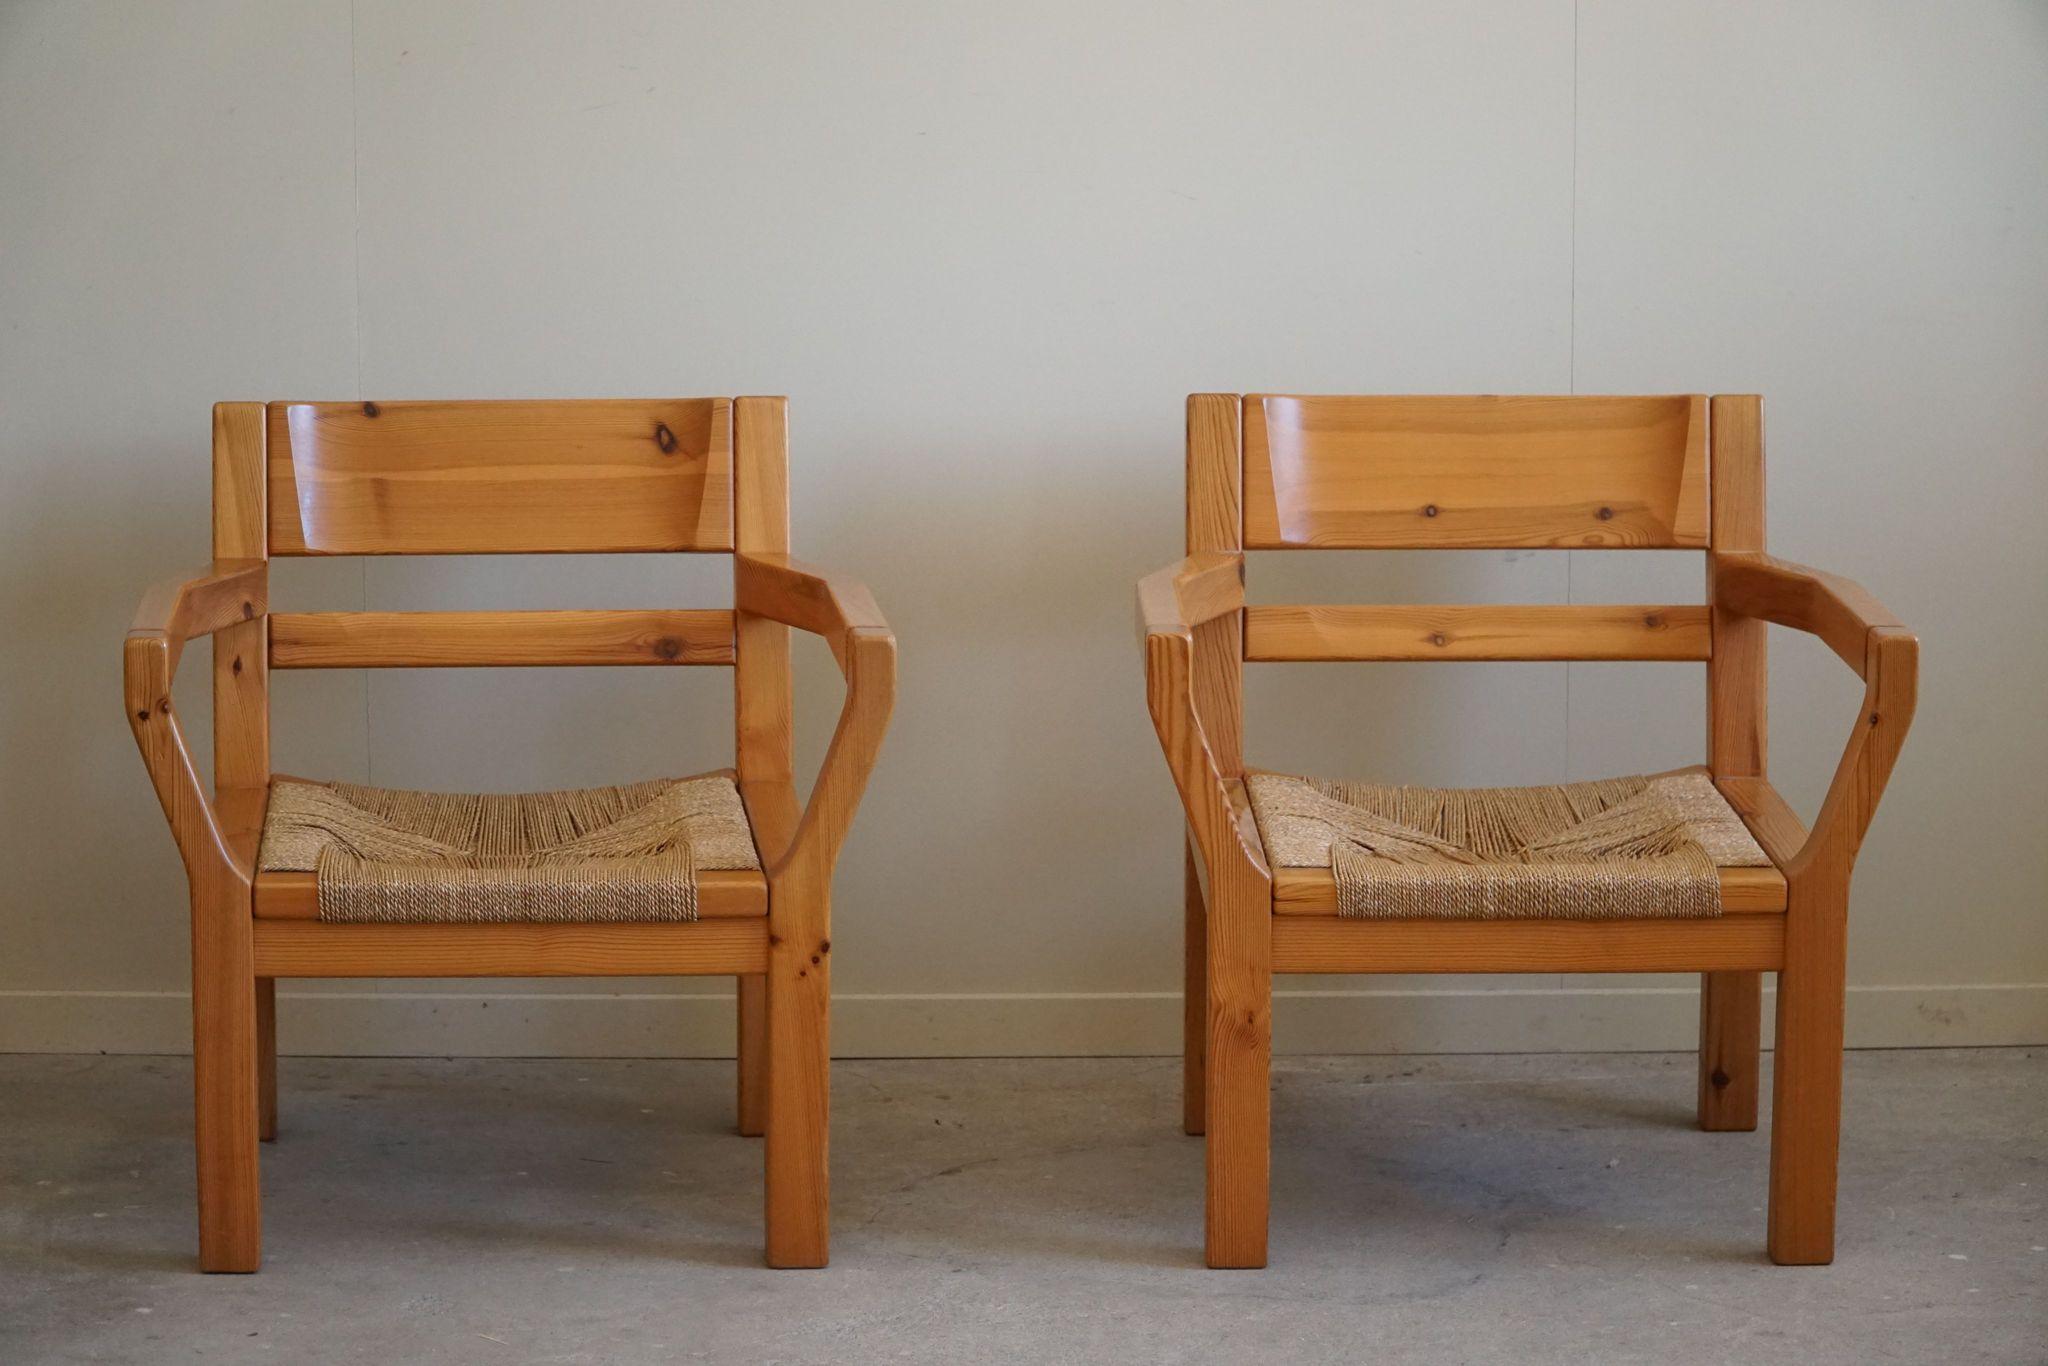 20th Century Tage Poulsen, A Pair of Brutalist Chairs in Pine & Cord, Danish Modern, 1970s For Sale